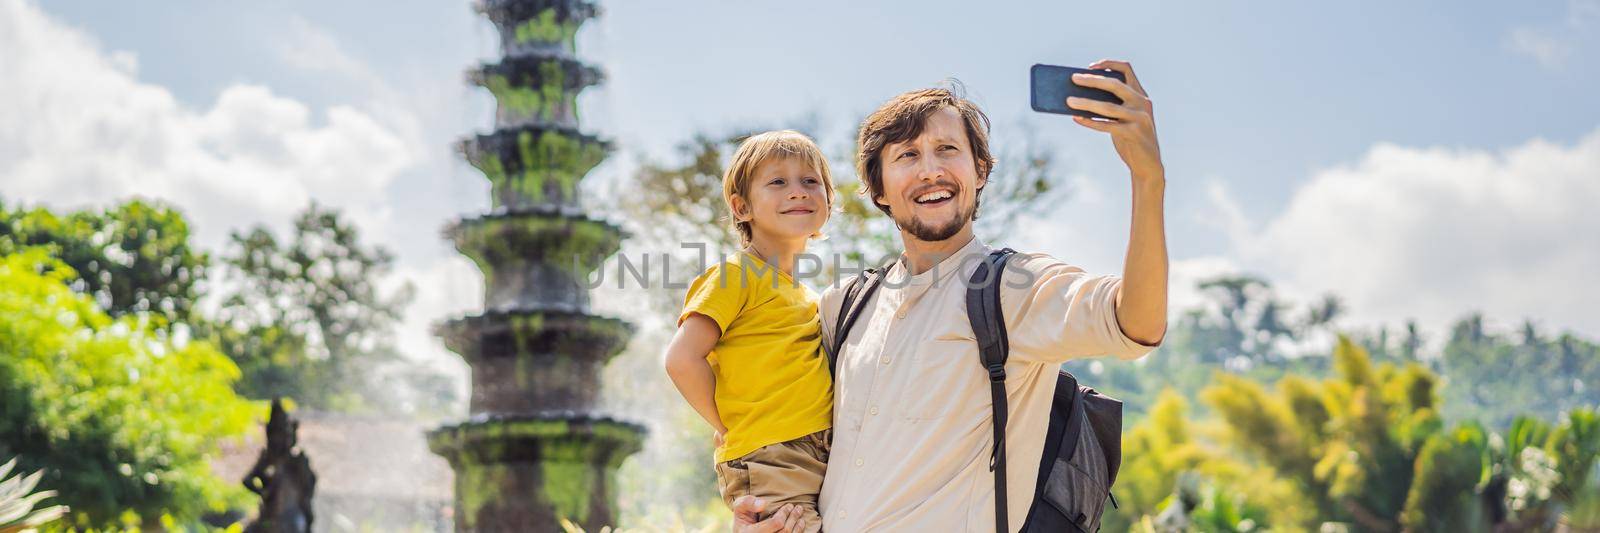 Dad and son tourists in Taman Tirtagangga, Water palace, Water park, Bali Indonesia. Traveling with children concept. Kids friendly place BANNER, LONG FORMAT by galitskaya